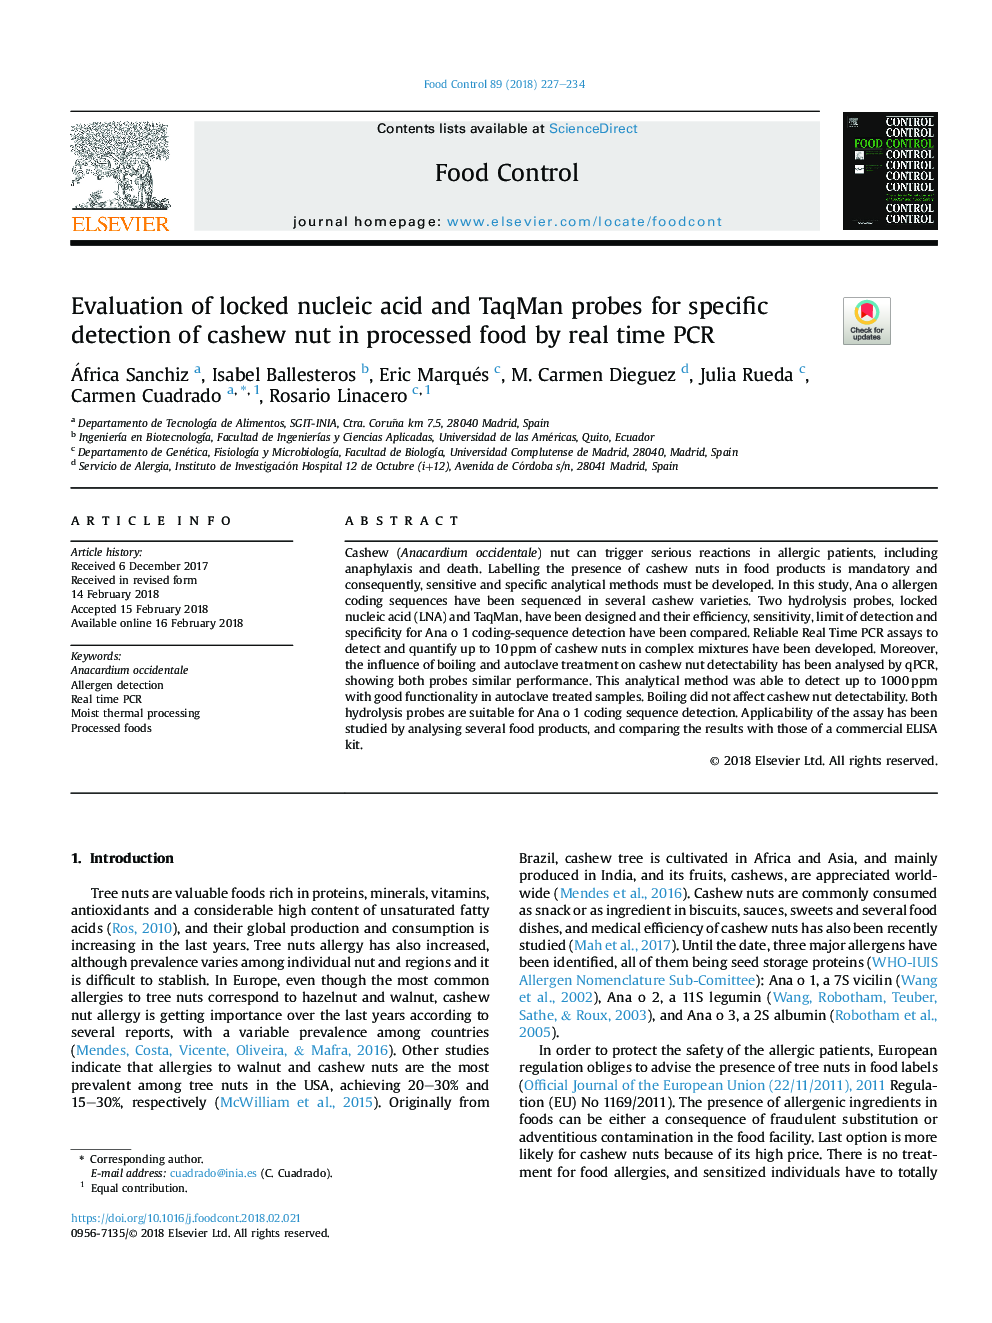 Evaluation of locked nucleic acid and TaqMan probes for specific detection of cashew nut in processed food by real time PCR